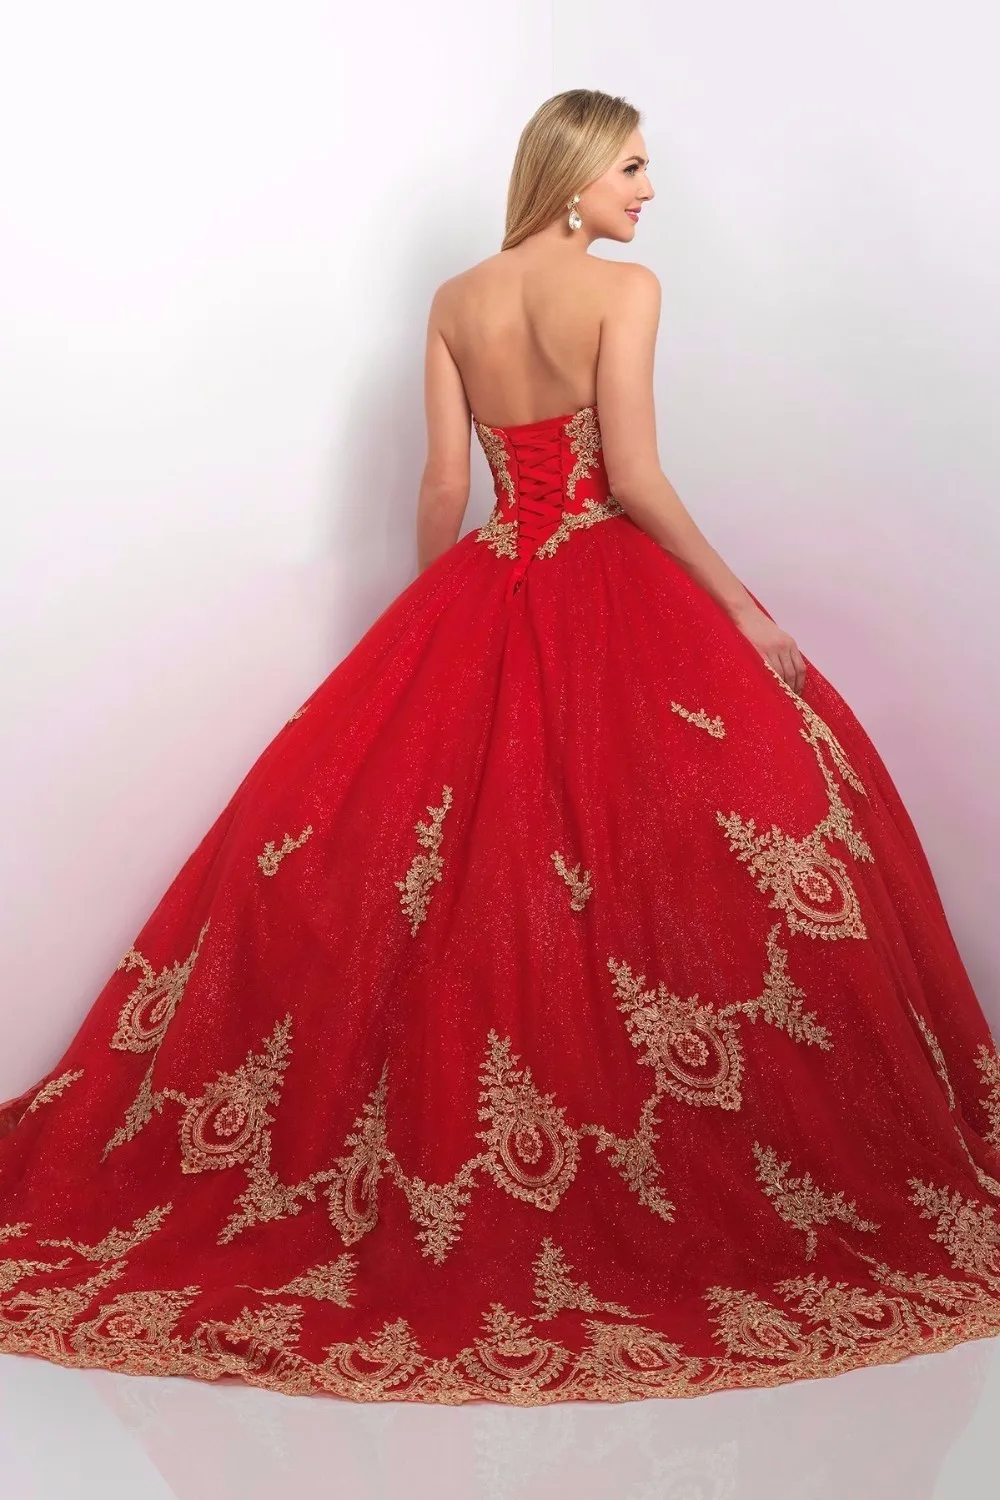 Liuru Dress Sweetheart Quinceanera Dresses Gold Appliques Crystal Ball Gown Prom Dress Gold And Red 18